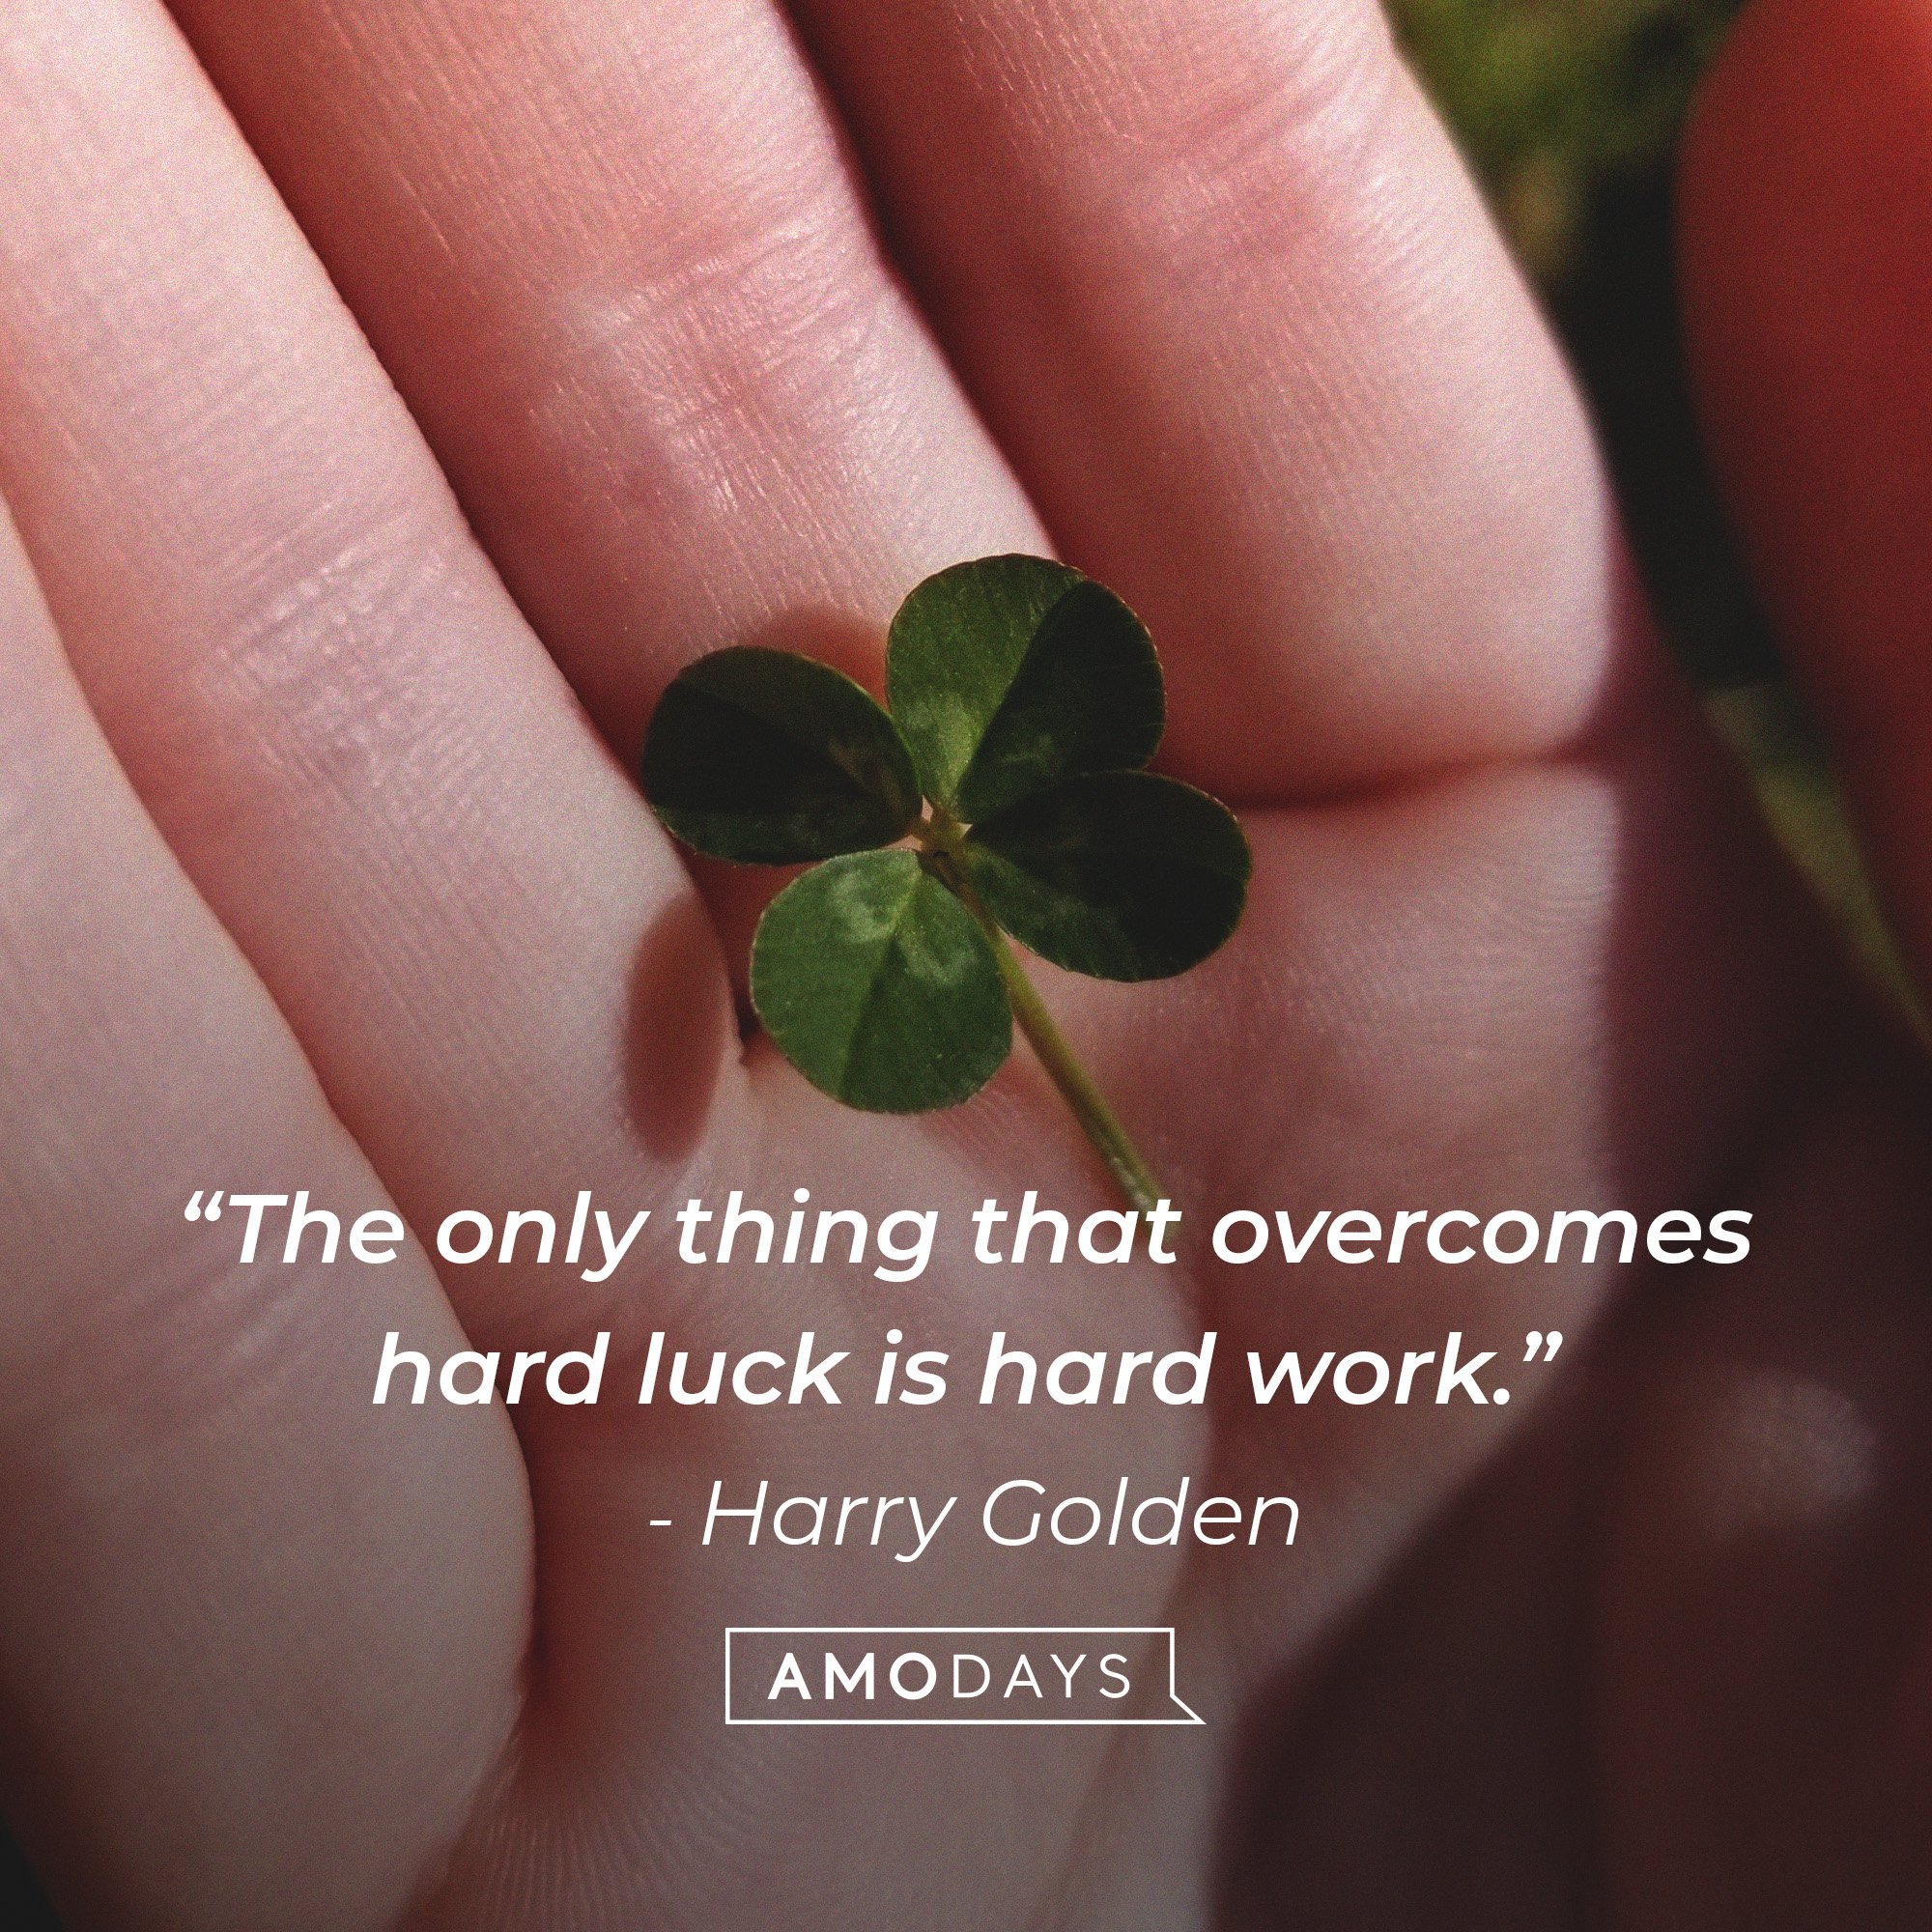 Harry Golden's quote: “The only thing that overcomes hard luck is hard work.” | Image: AmoDays